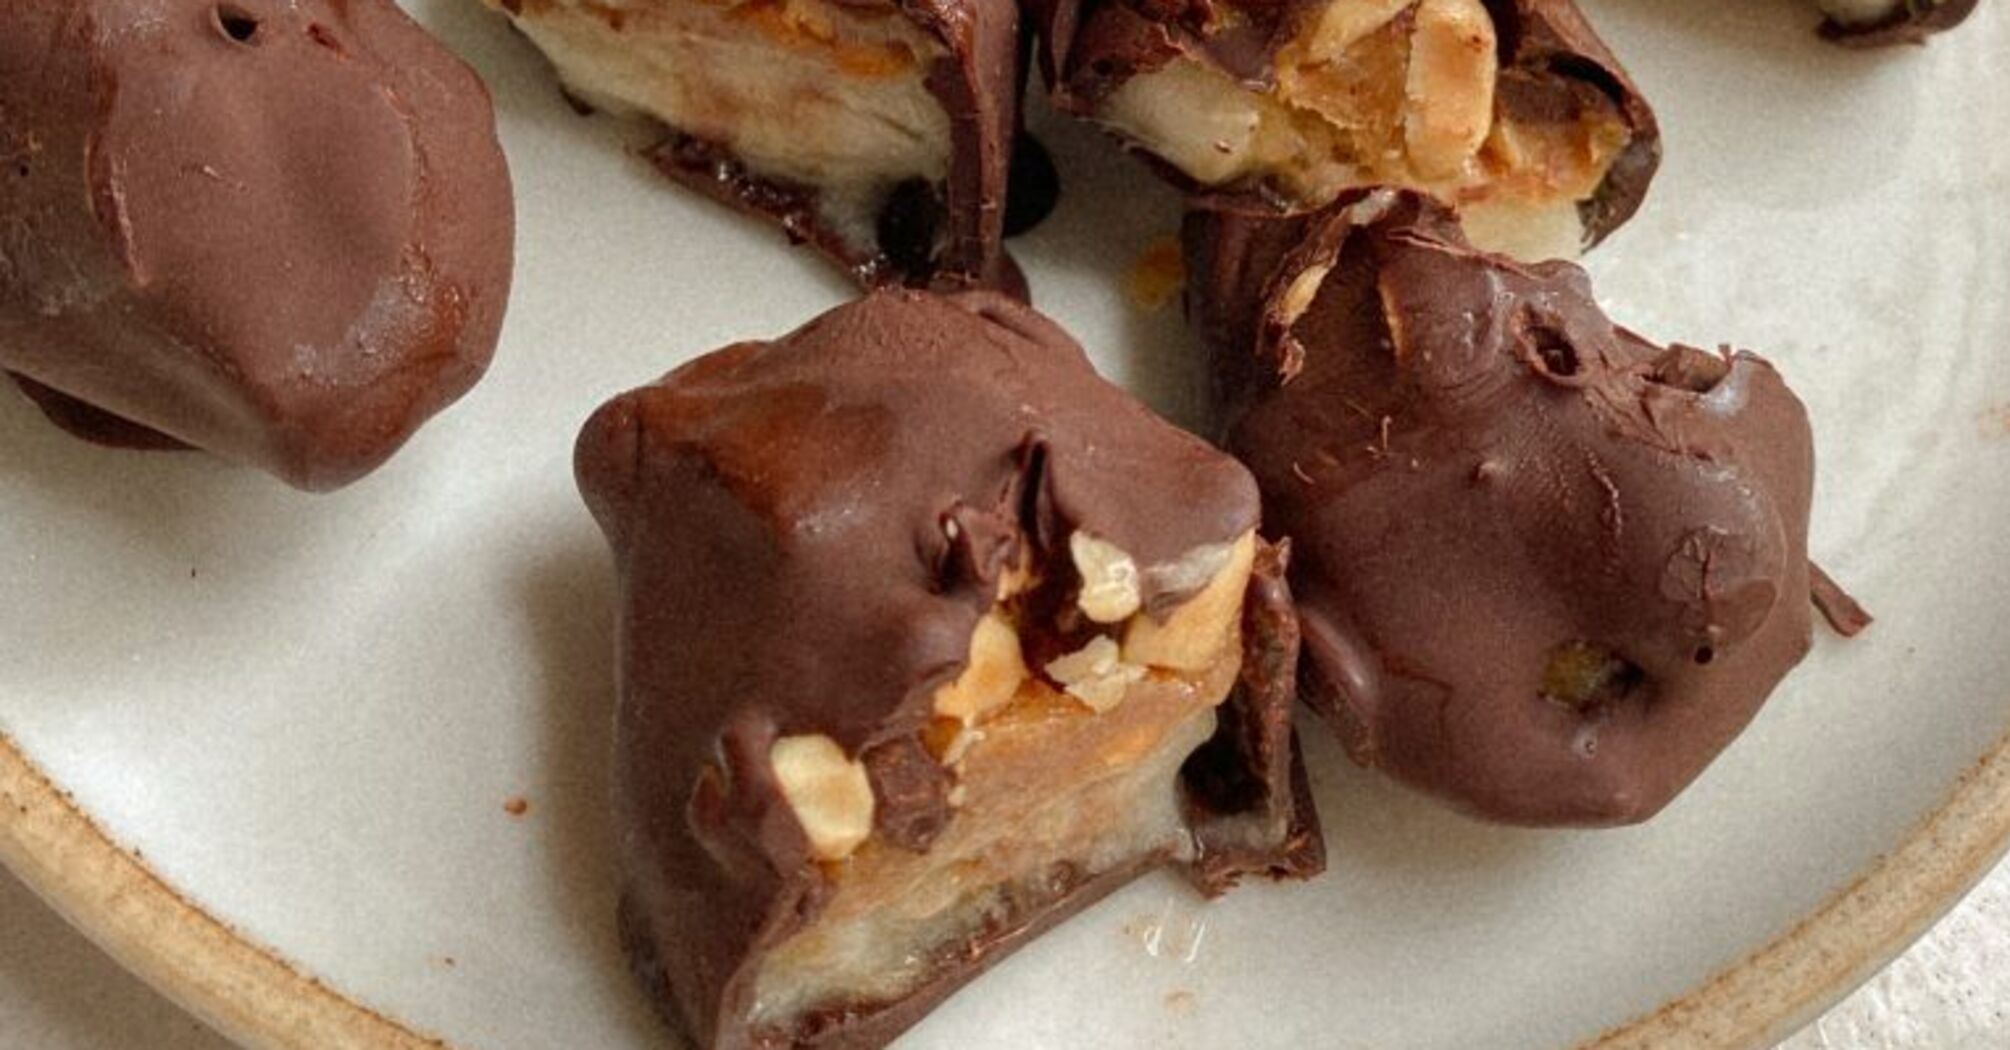 Homemade snickers with banana: how to make a spectacular dessert quickly